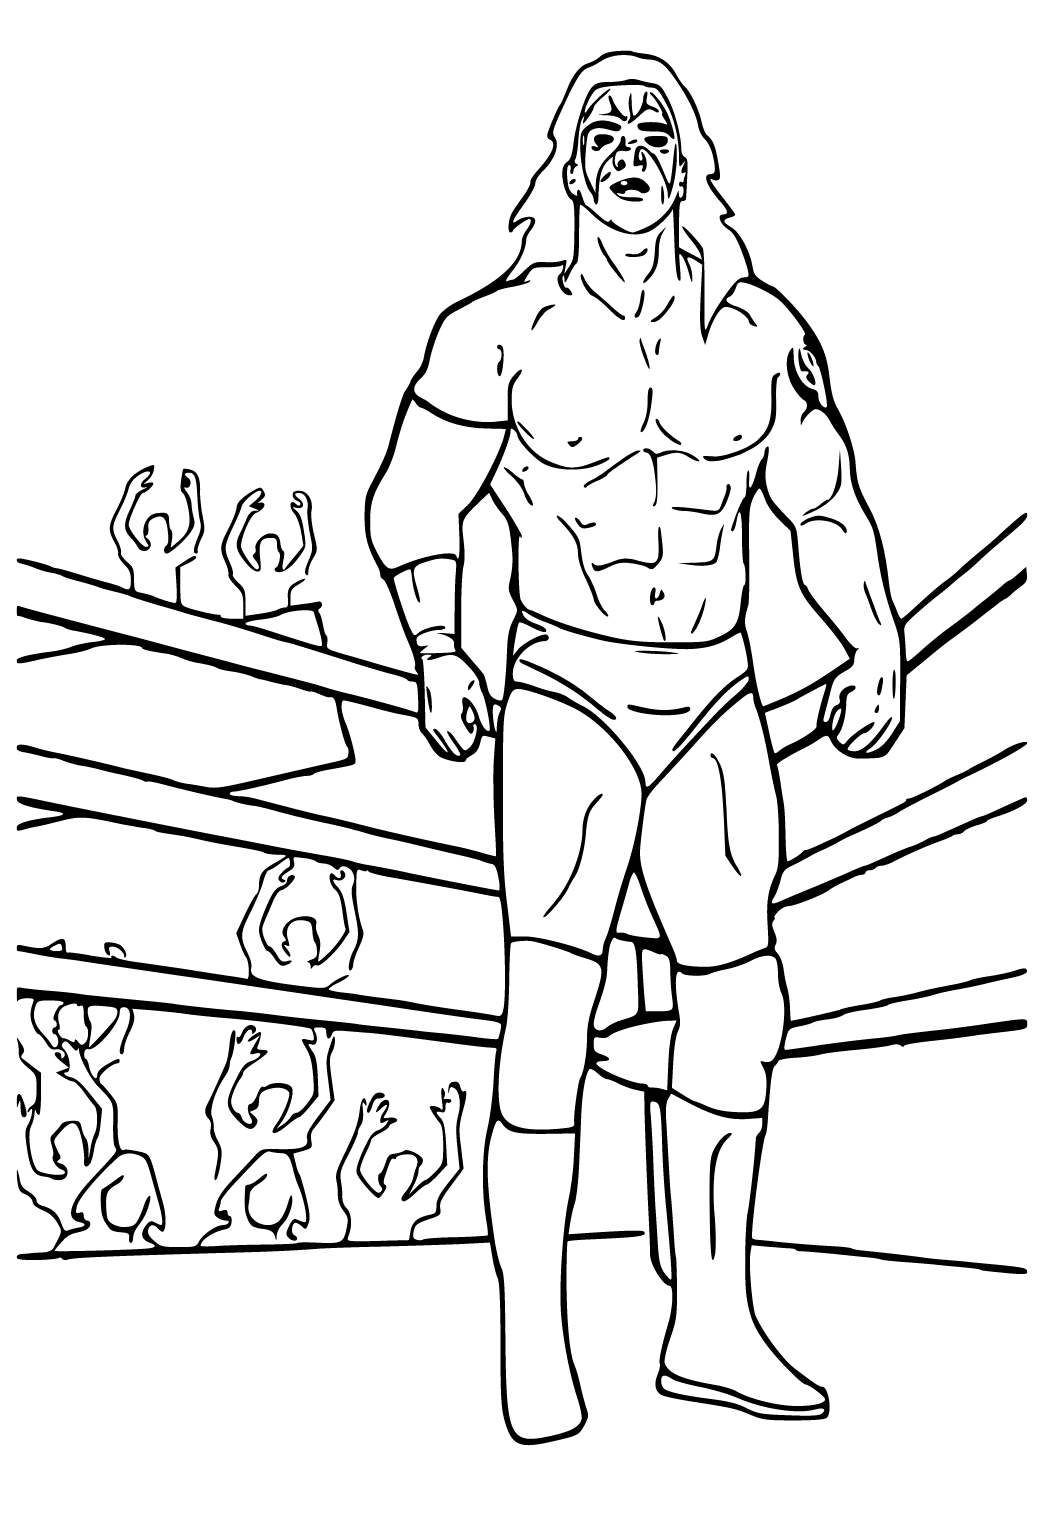 Free printable wwe arena coloring page for adults and kids